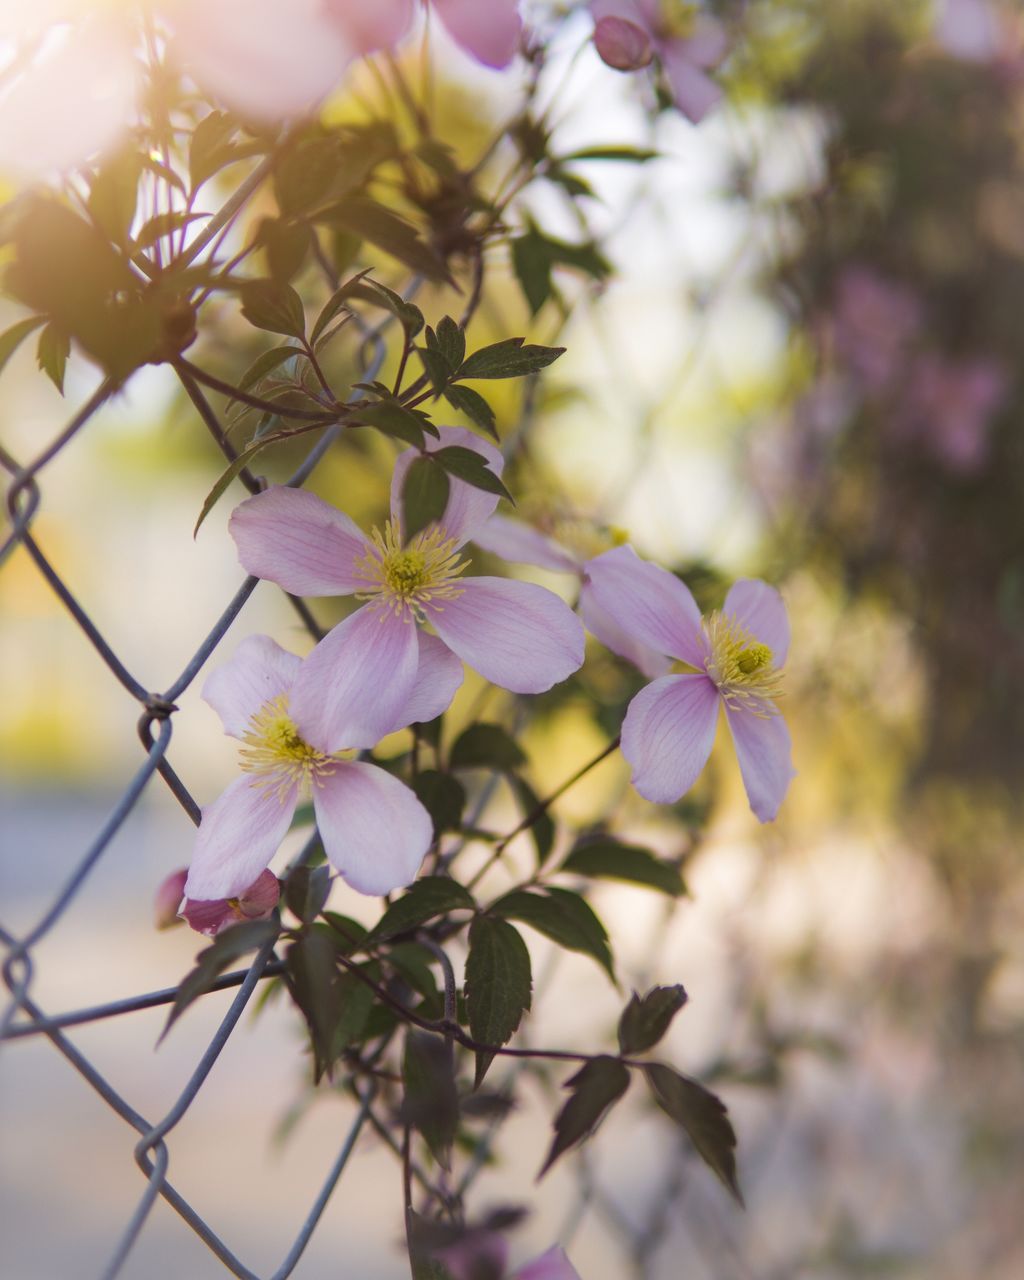 plant, flower, flowering plant, blossom, beauty in nature, branch, freshness, nature, spring, tree, petal, close-up, macro photography, leaf, fragility, growth, springtime, no people, focus on foreground, outdoors, selective focus, sunlight, fence, day, chainlink fence, pink, flower head, lilac, plant part, purple, sky, inflorescence, twig, defocused, autumn, botany